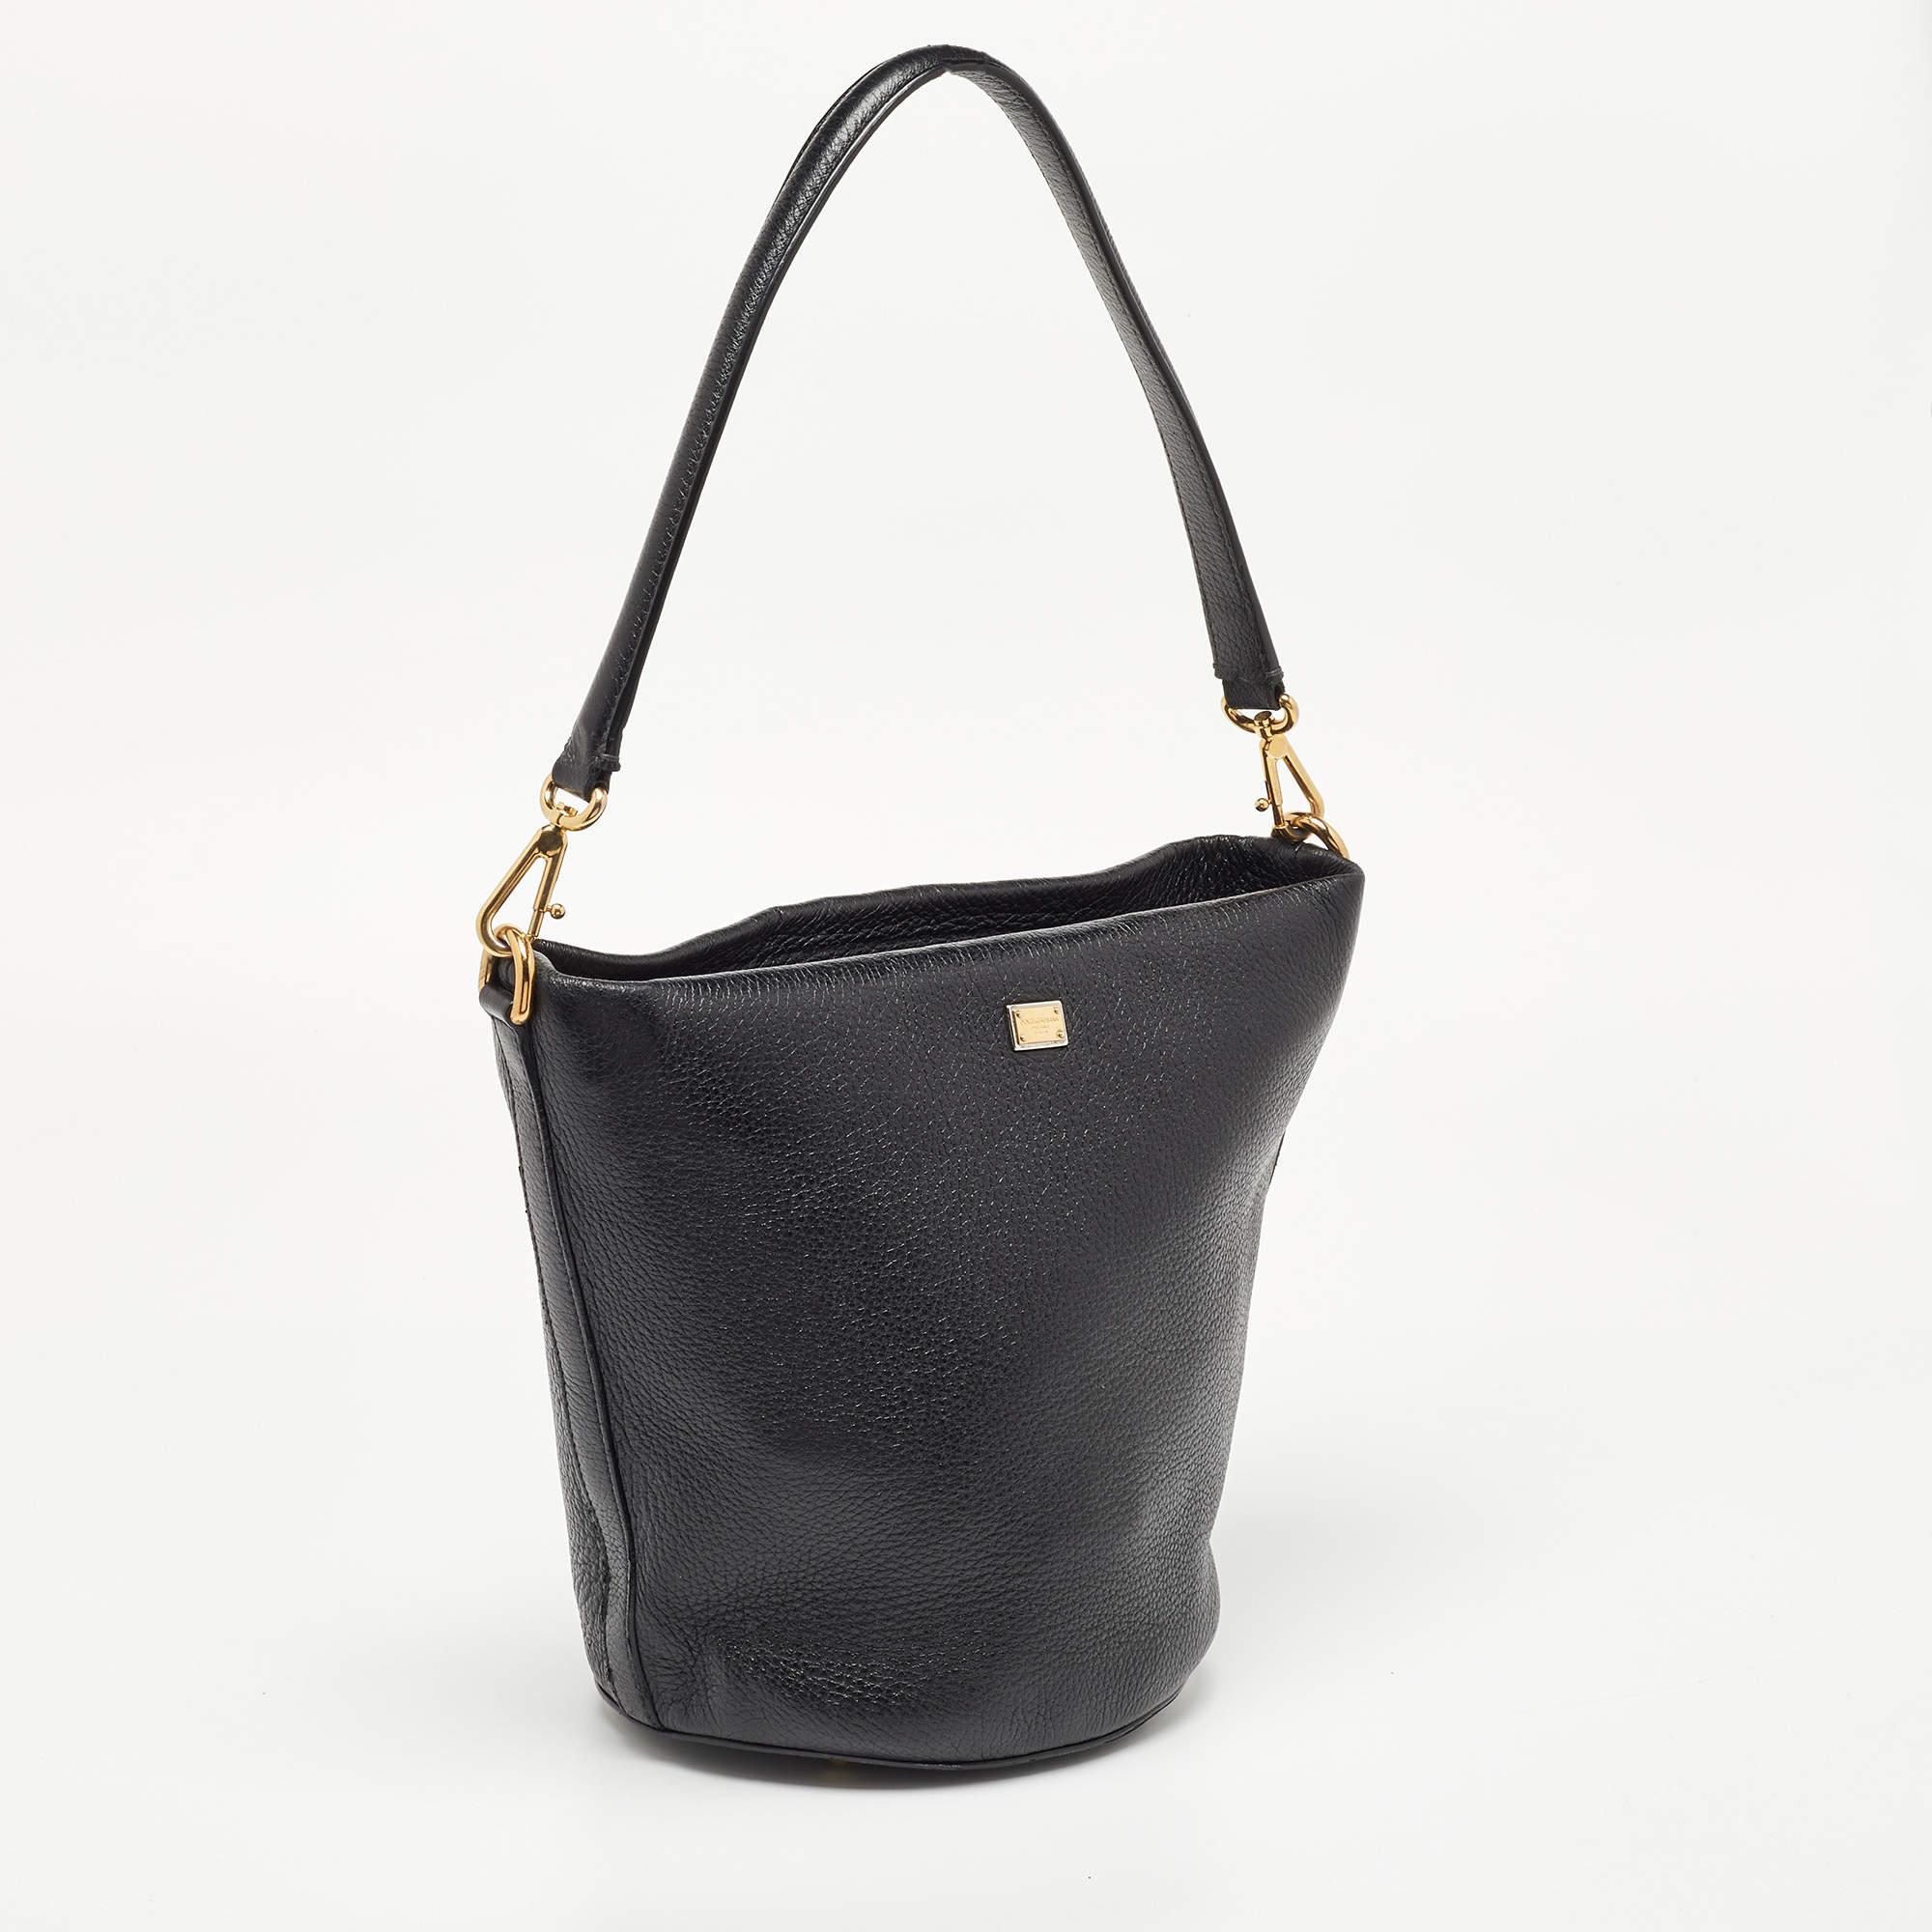 Brimming with artistry and quality craftsmanship, it is designed in a bucket silhouette, and the interior is spacious enough to hold all your essentials. This beautiful piece deserves to be carried with style by you.

